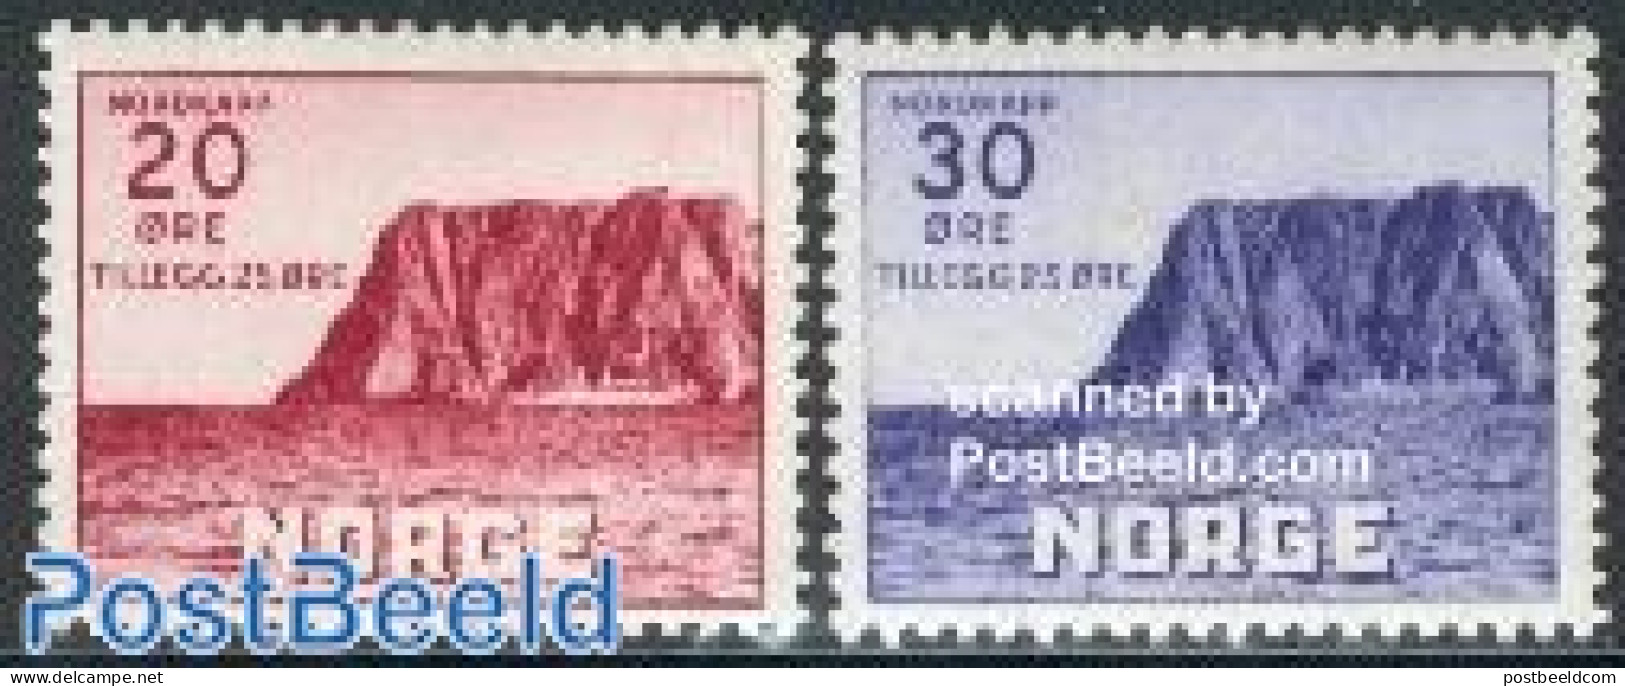 Norway 1938 Tourism 2v, Mint NH, Various - Tourism - Unused Stamps